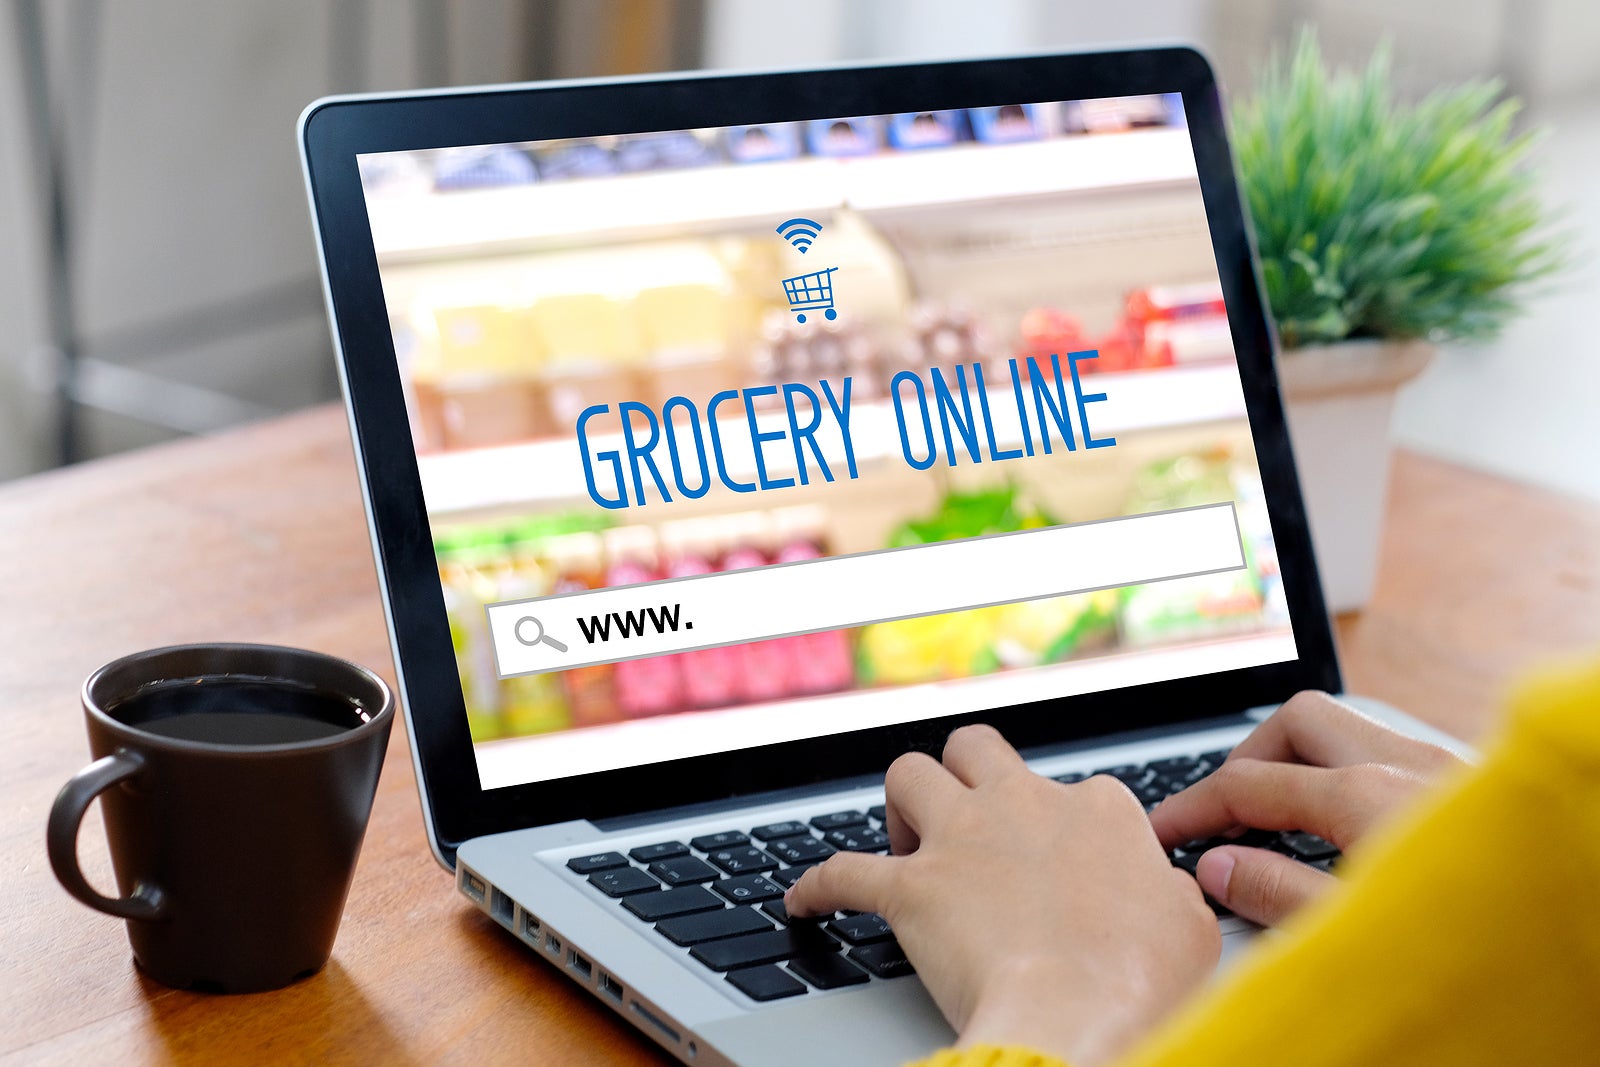 Grocery online shop to order food delivery from supermarket, Woman hands using laptop computer for shopping grocery store online web, www. on search bar e commerce website template, business technology